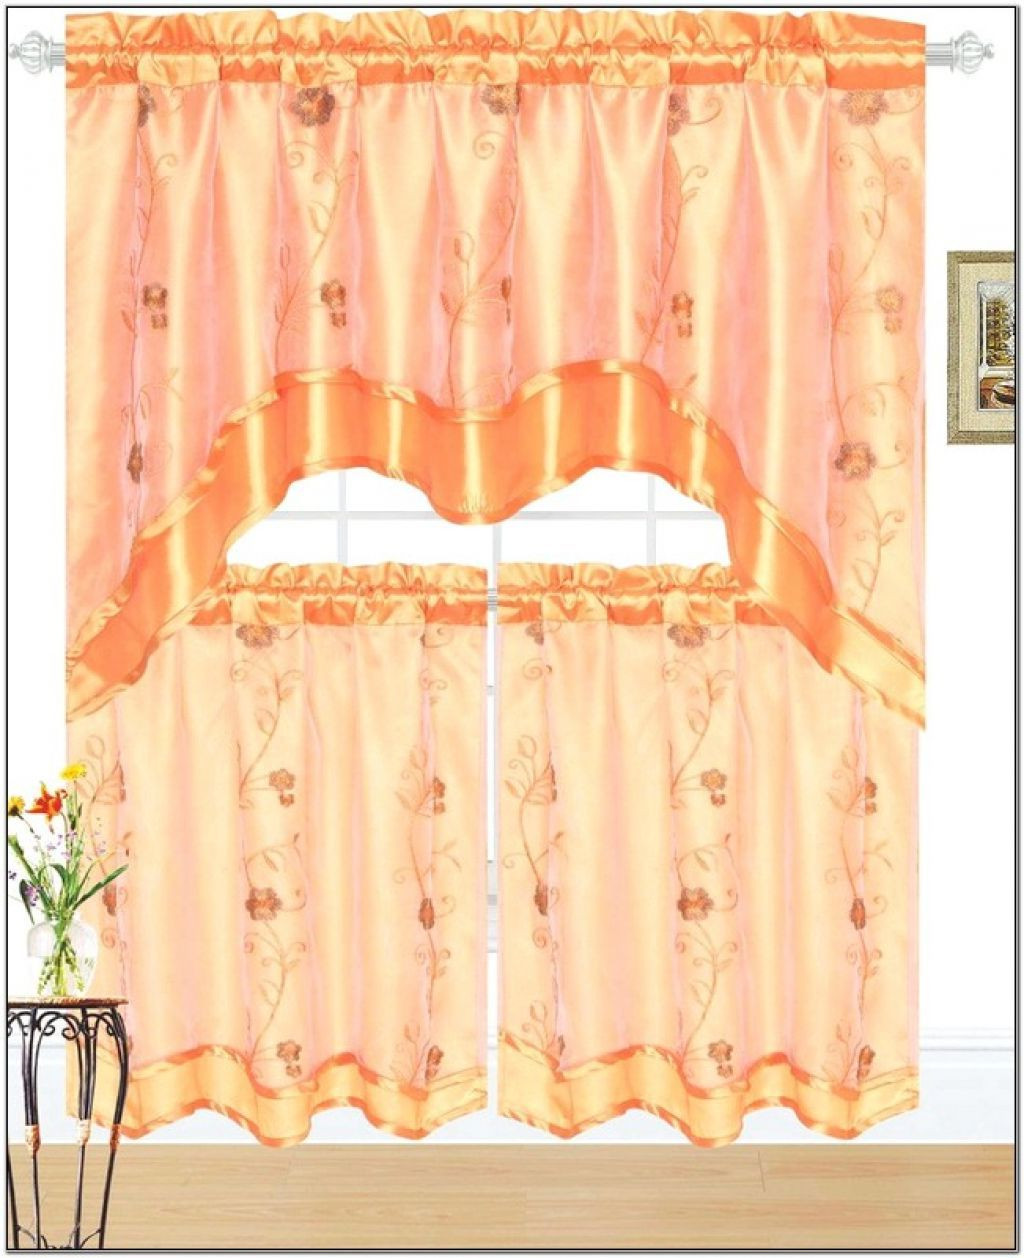 Penneys Kitchen Curtains
 Jcpenney Kitchen Curtain – stylish Drape for Cooking Space